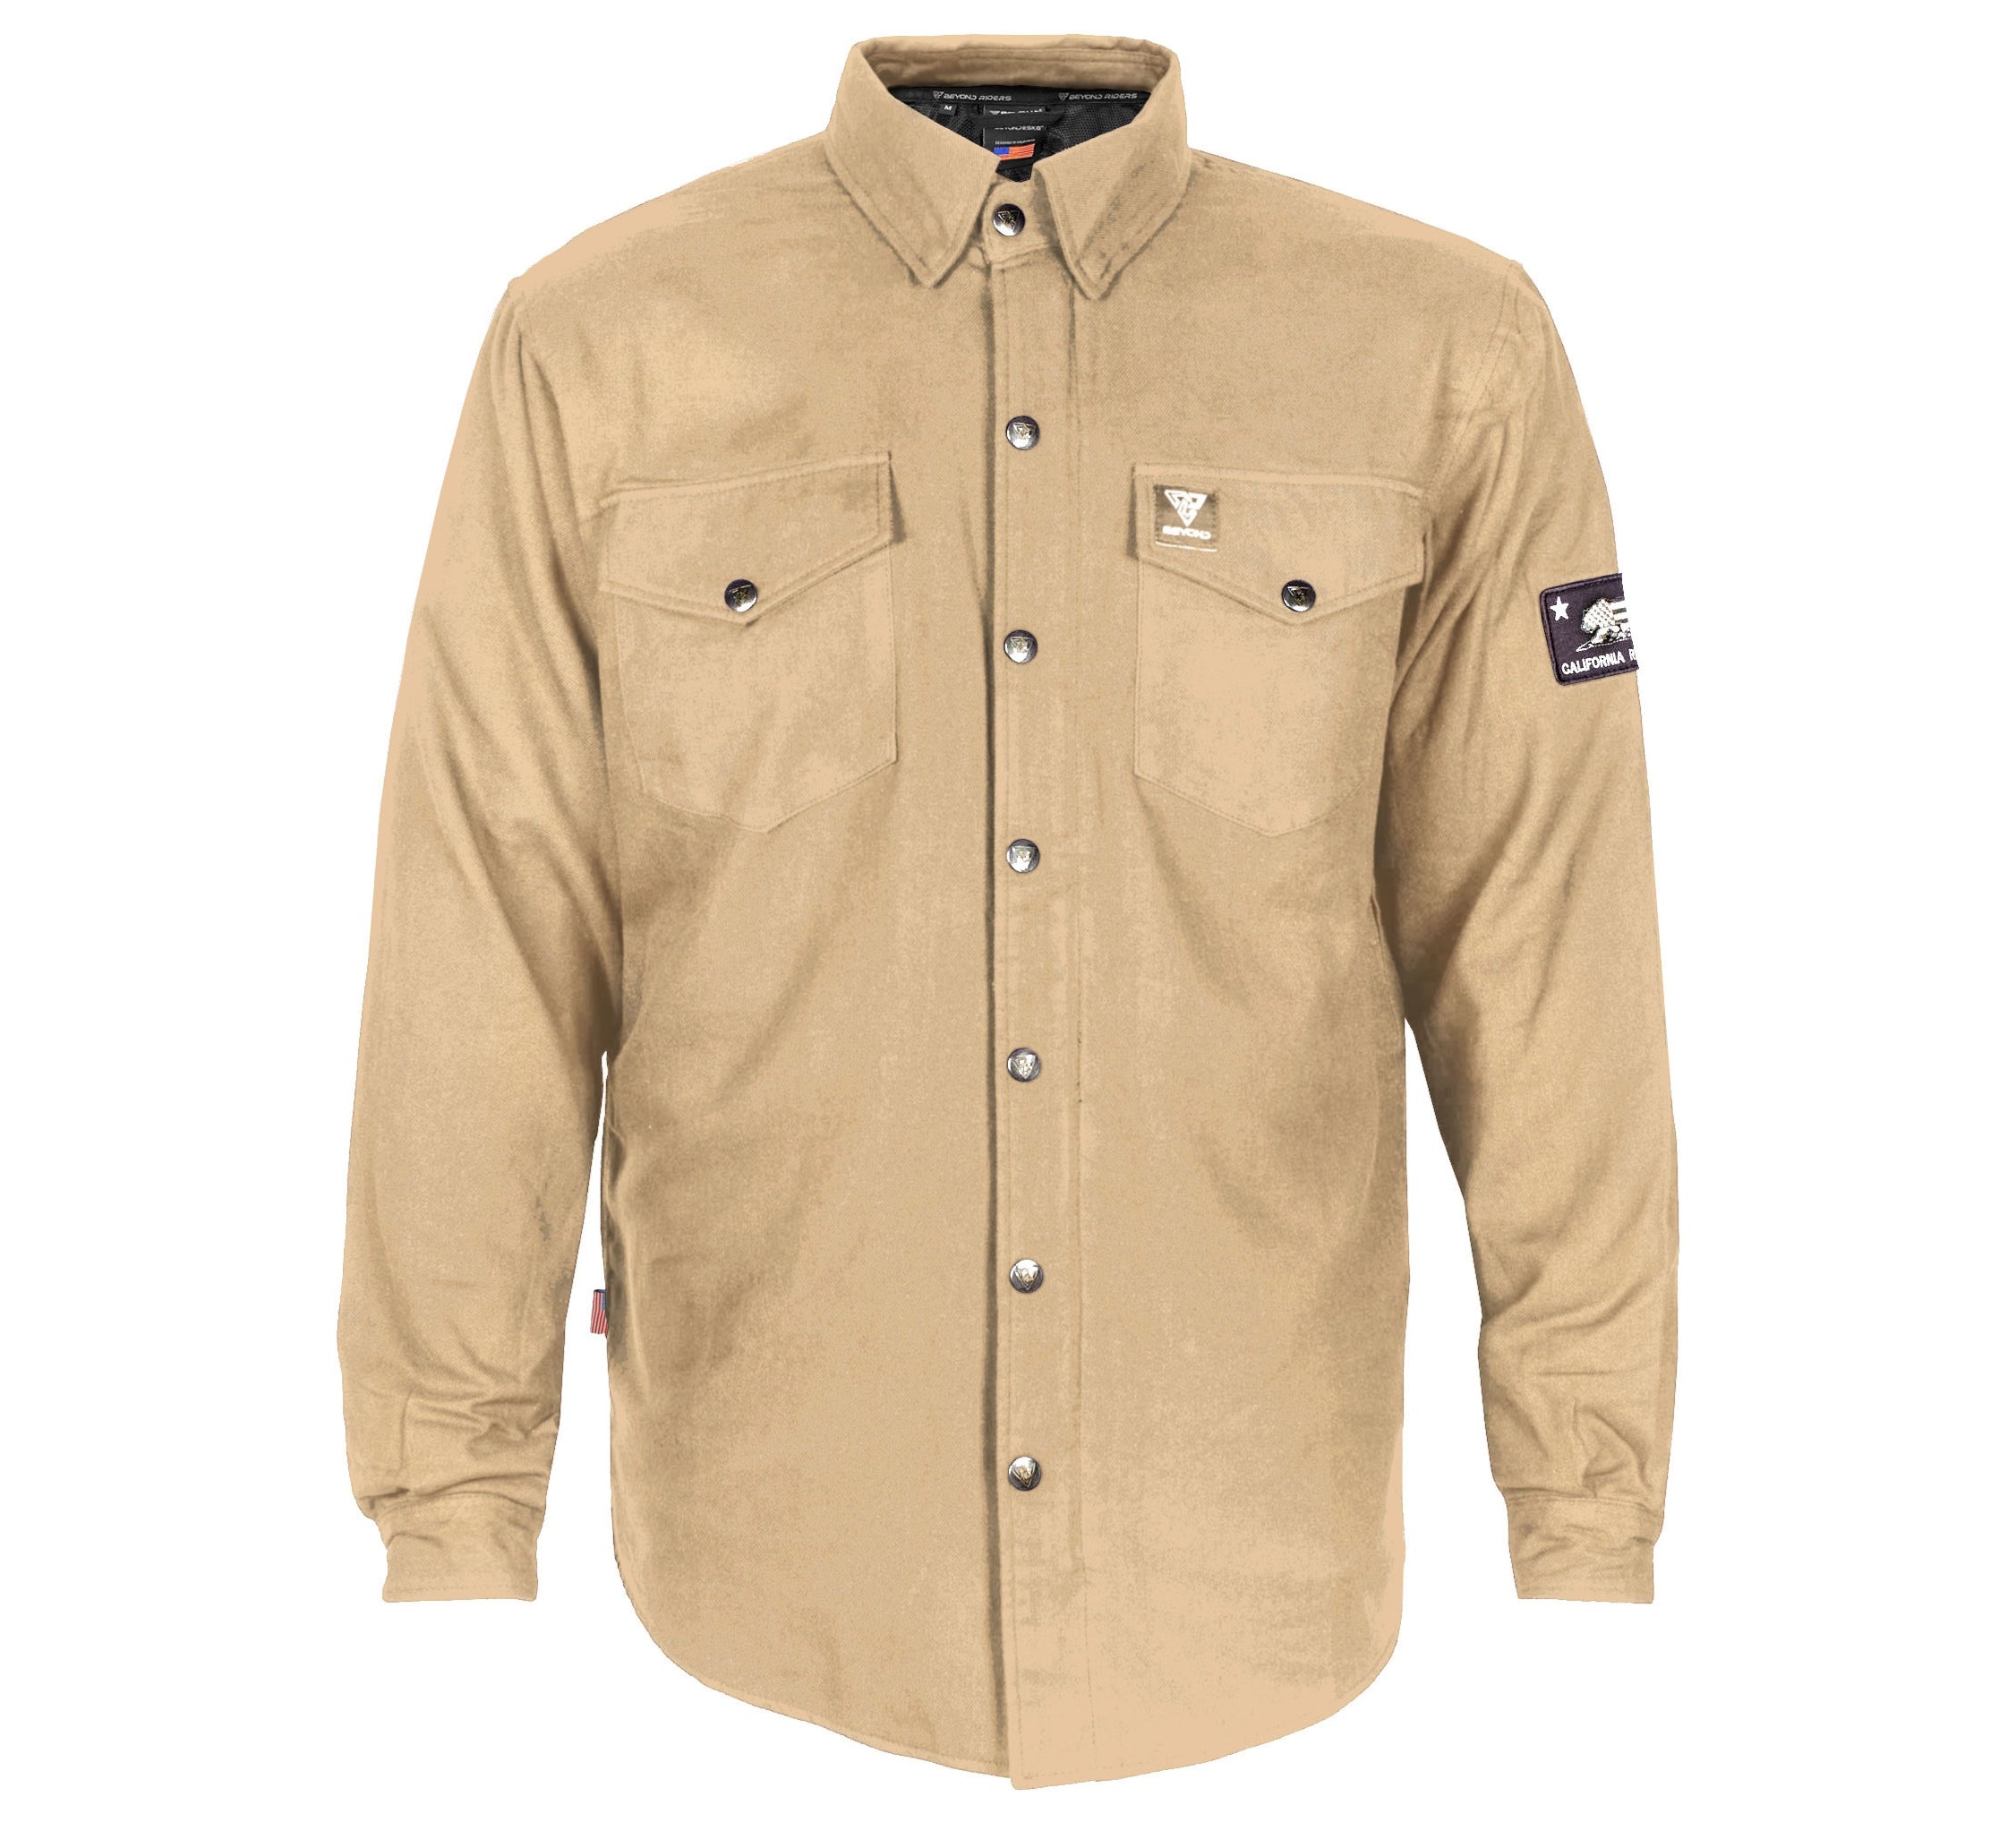 Protective Flannel Shirt - Khaki Solid with Pads